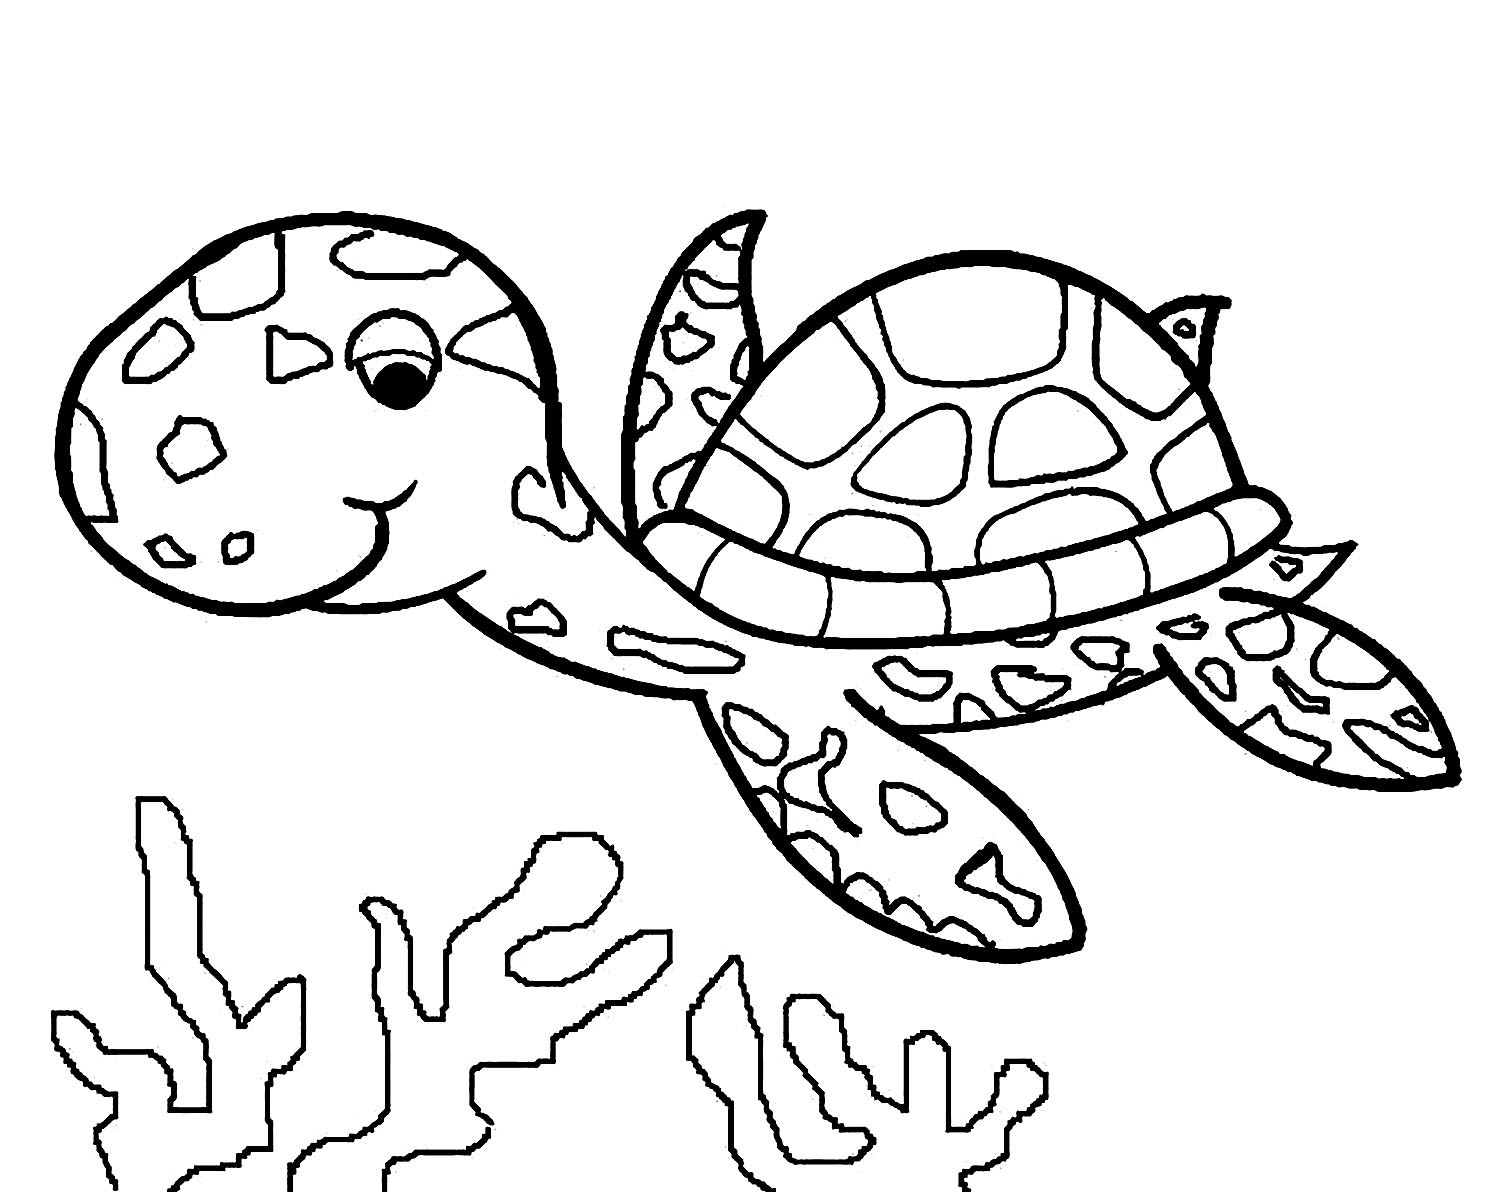 Kids Coloring Sheets
 Turtles to print Turtles Kids Coloring Pages